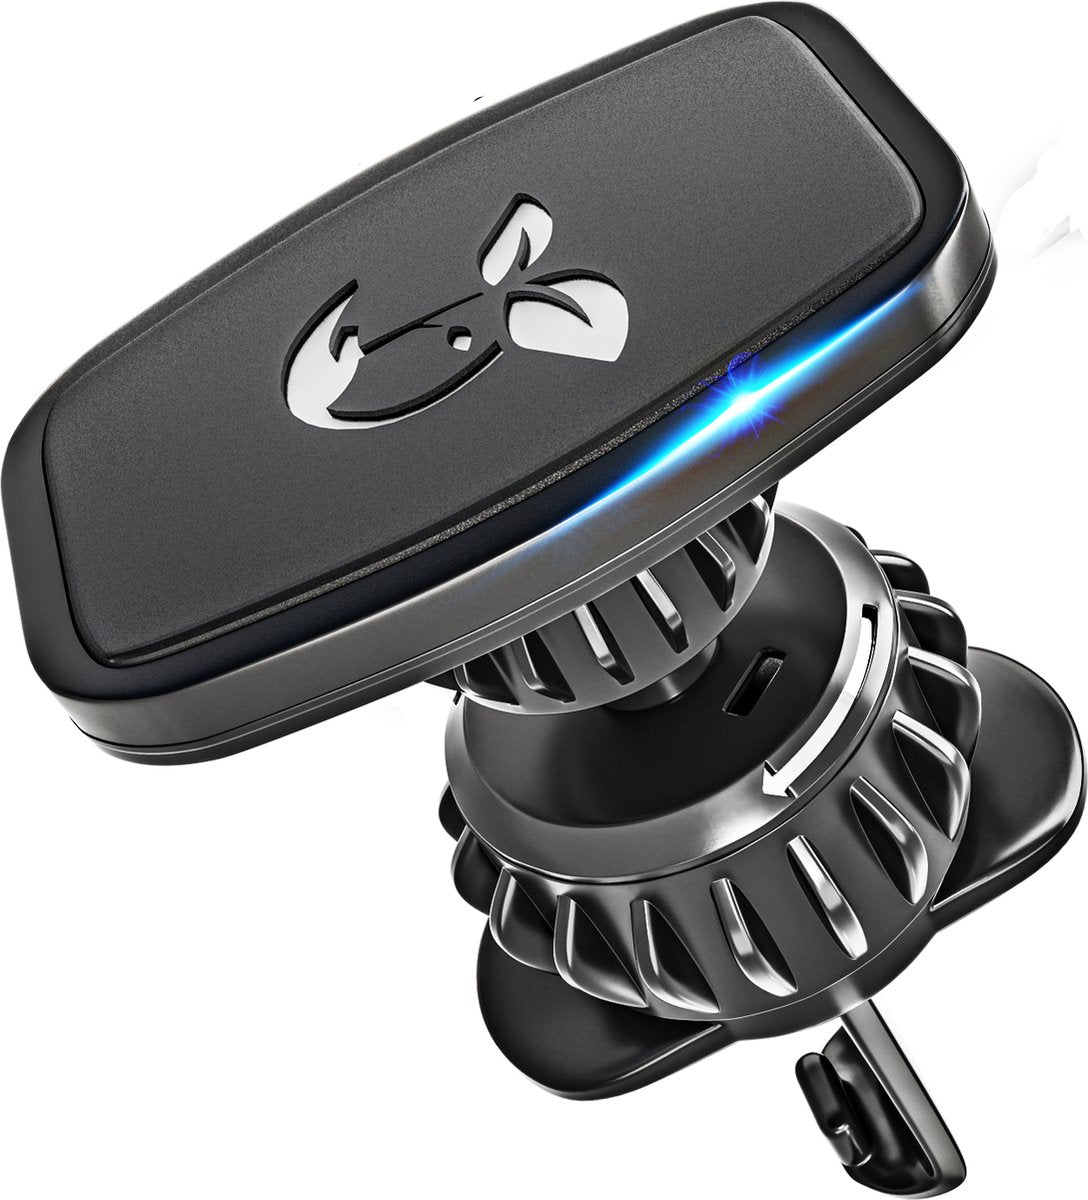 Installing Your Car Phone Holder: Best Practices to Follow